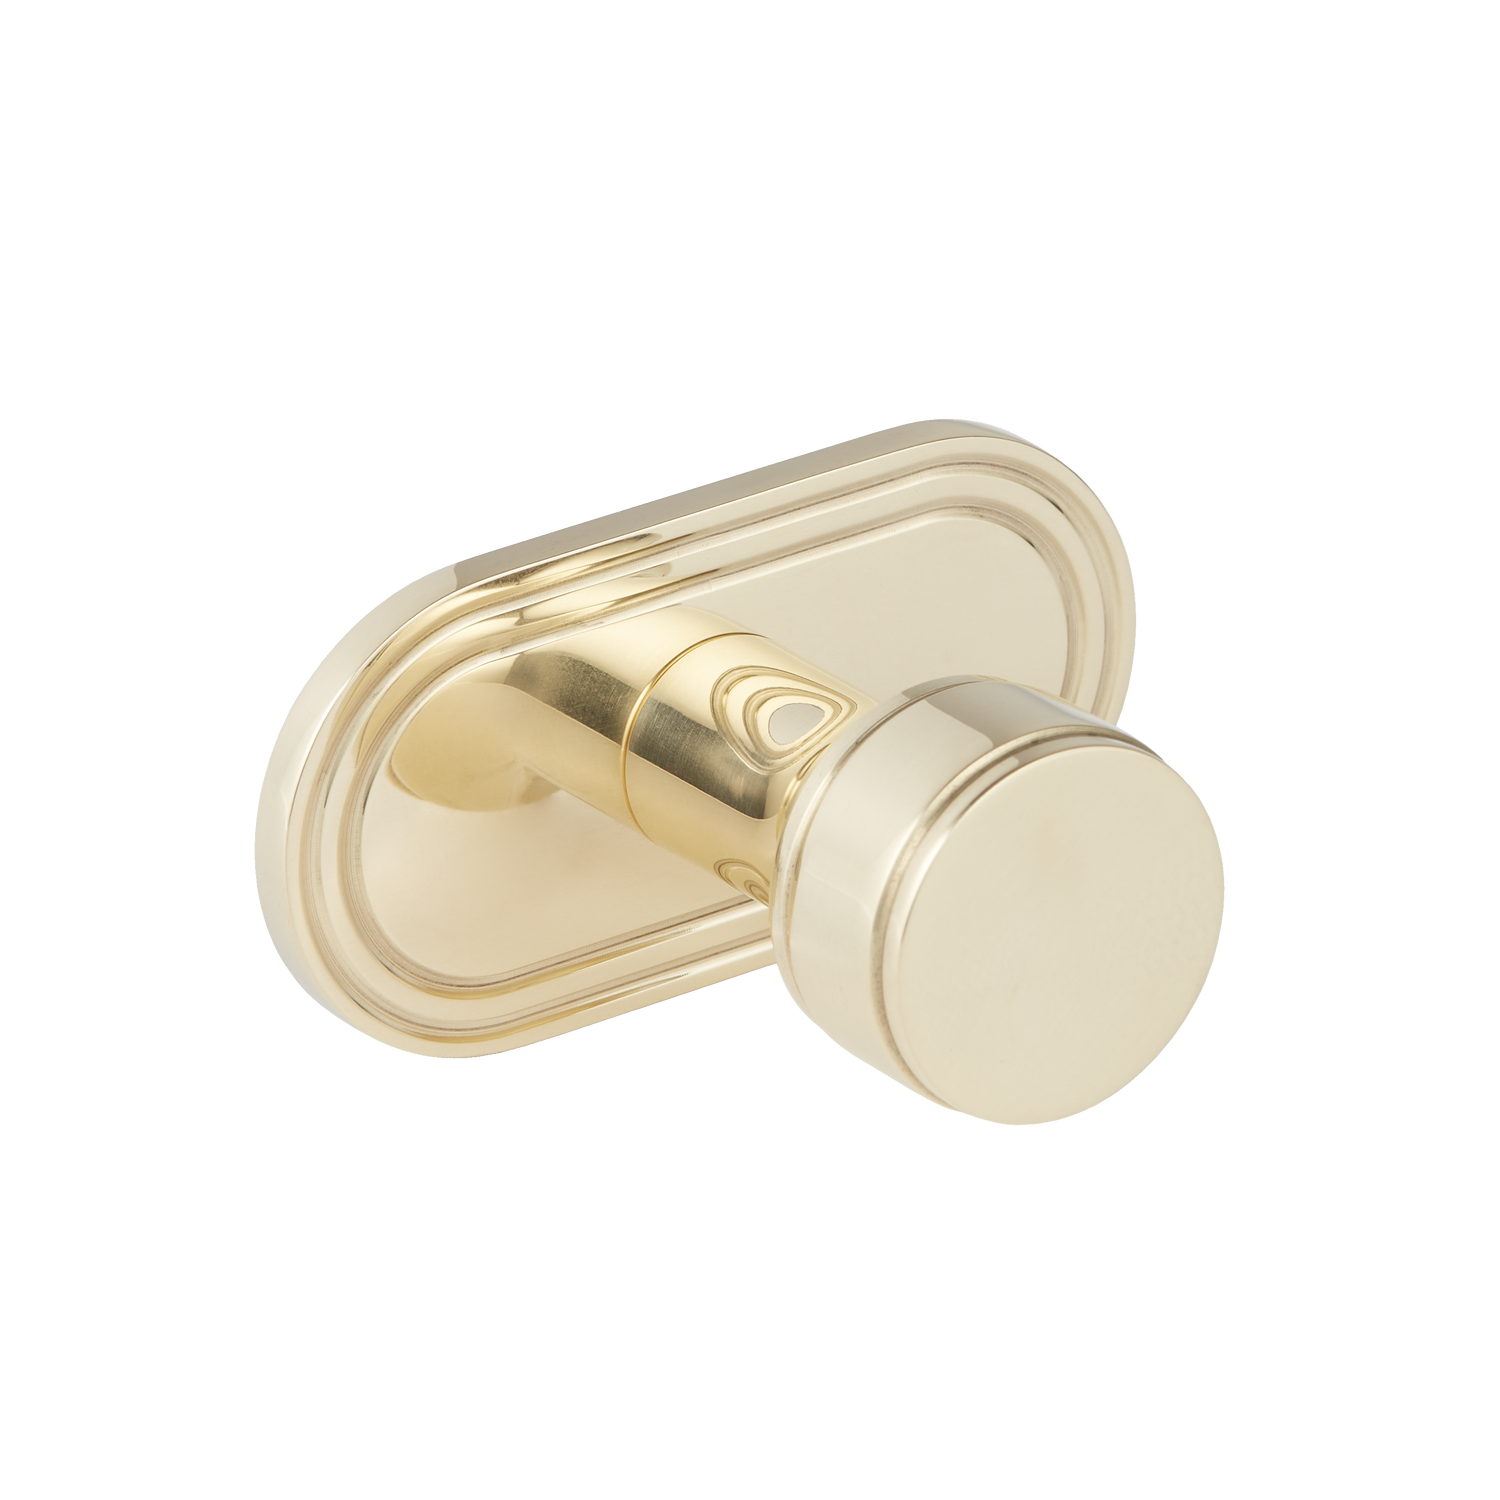 Product shown in our polished brass lacquered (PBL) finish